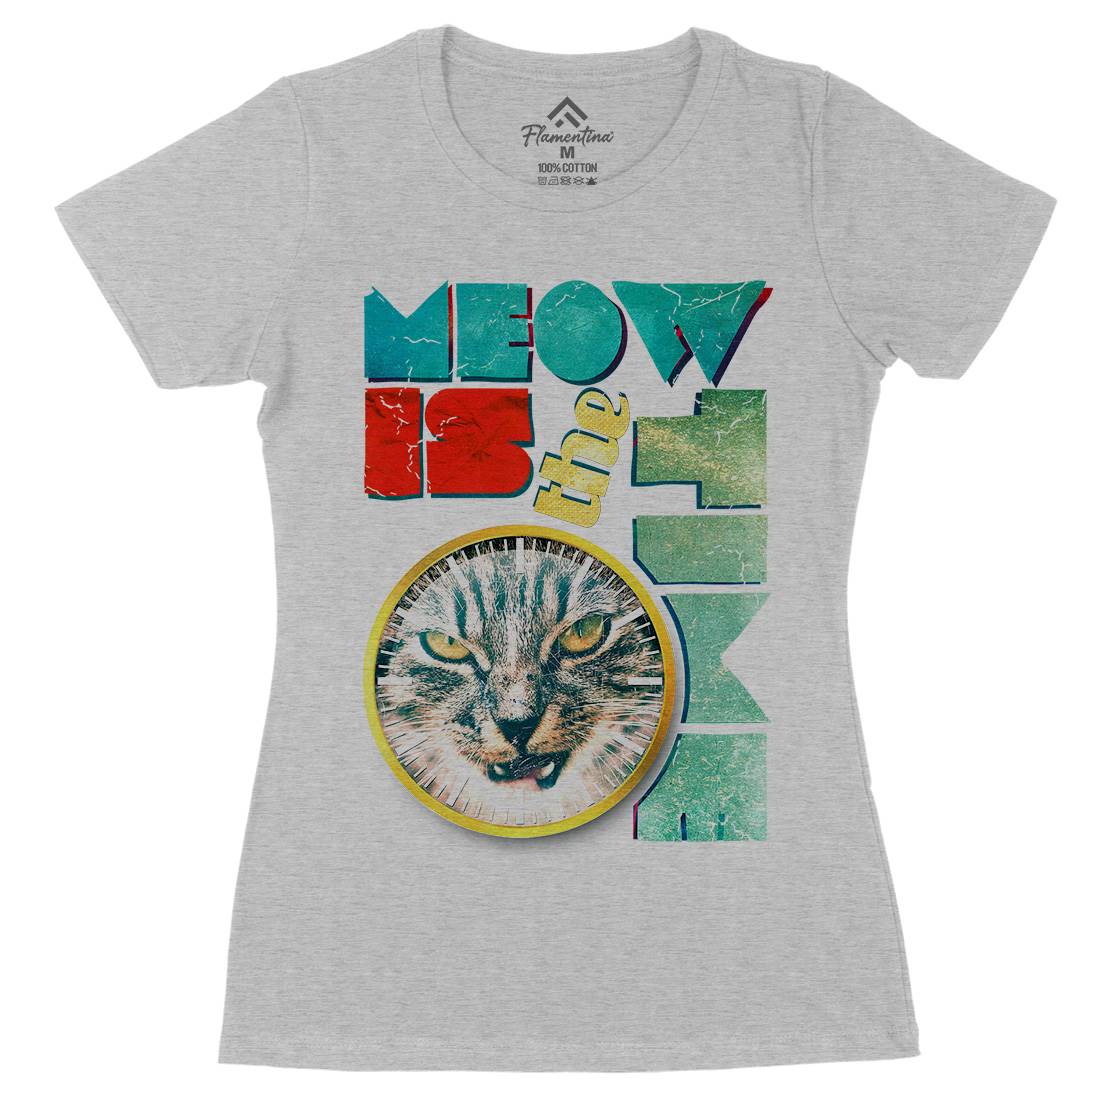 Meow Is The Time Womens Organic Crew Neck T-Shirt Animals A876